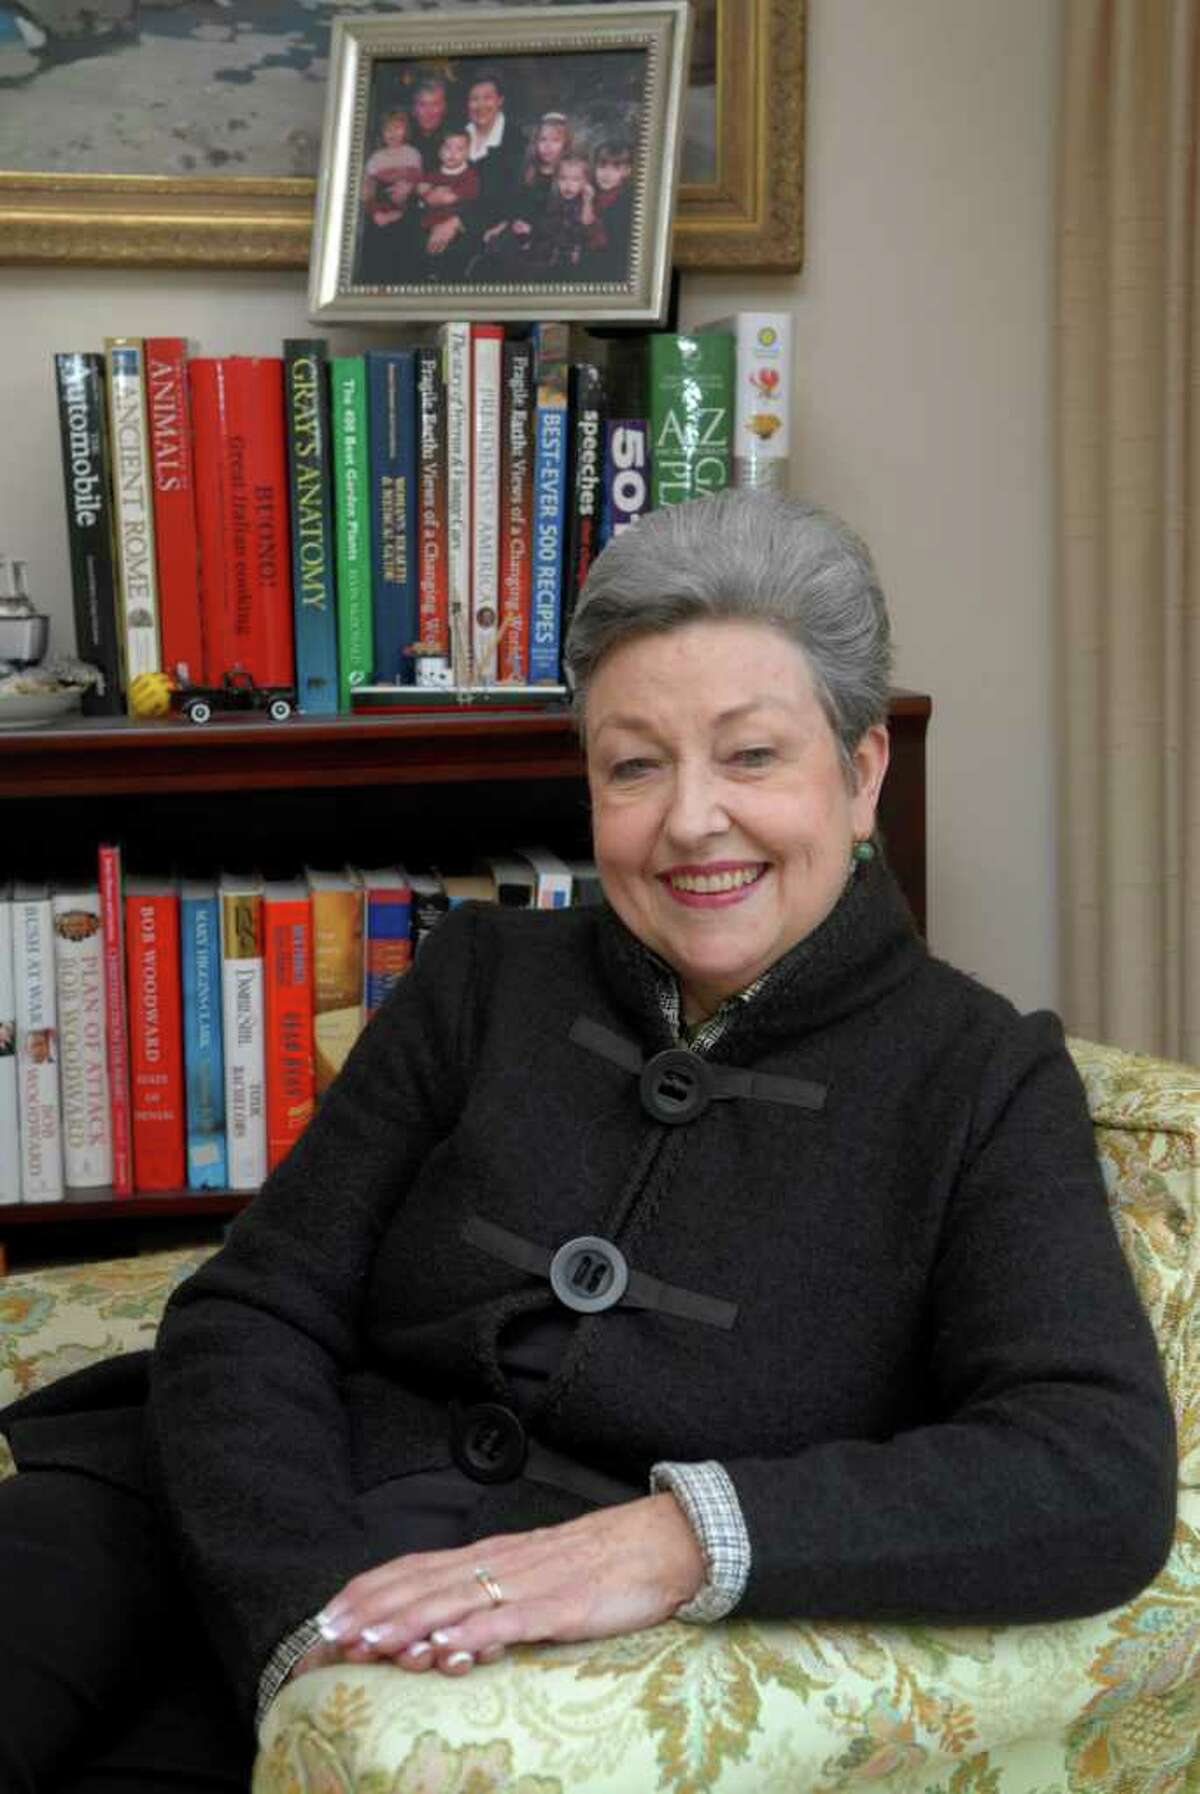 Former Volunteer Center executive director Roberta Eichler has stepped down after 22 years, she's pictured in her Stamford, Conn. home on Friday January 6, 2012.